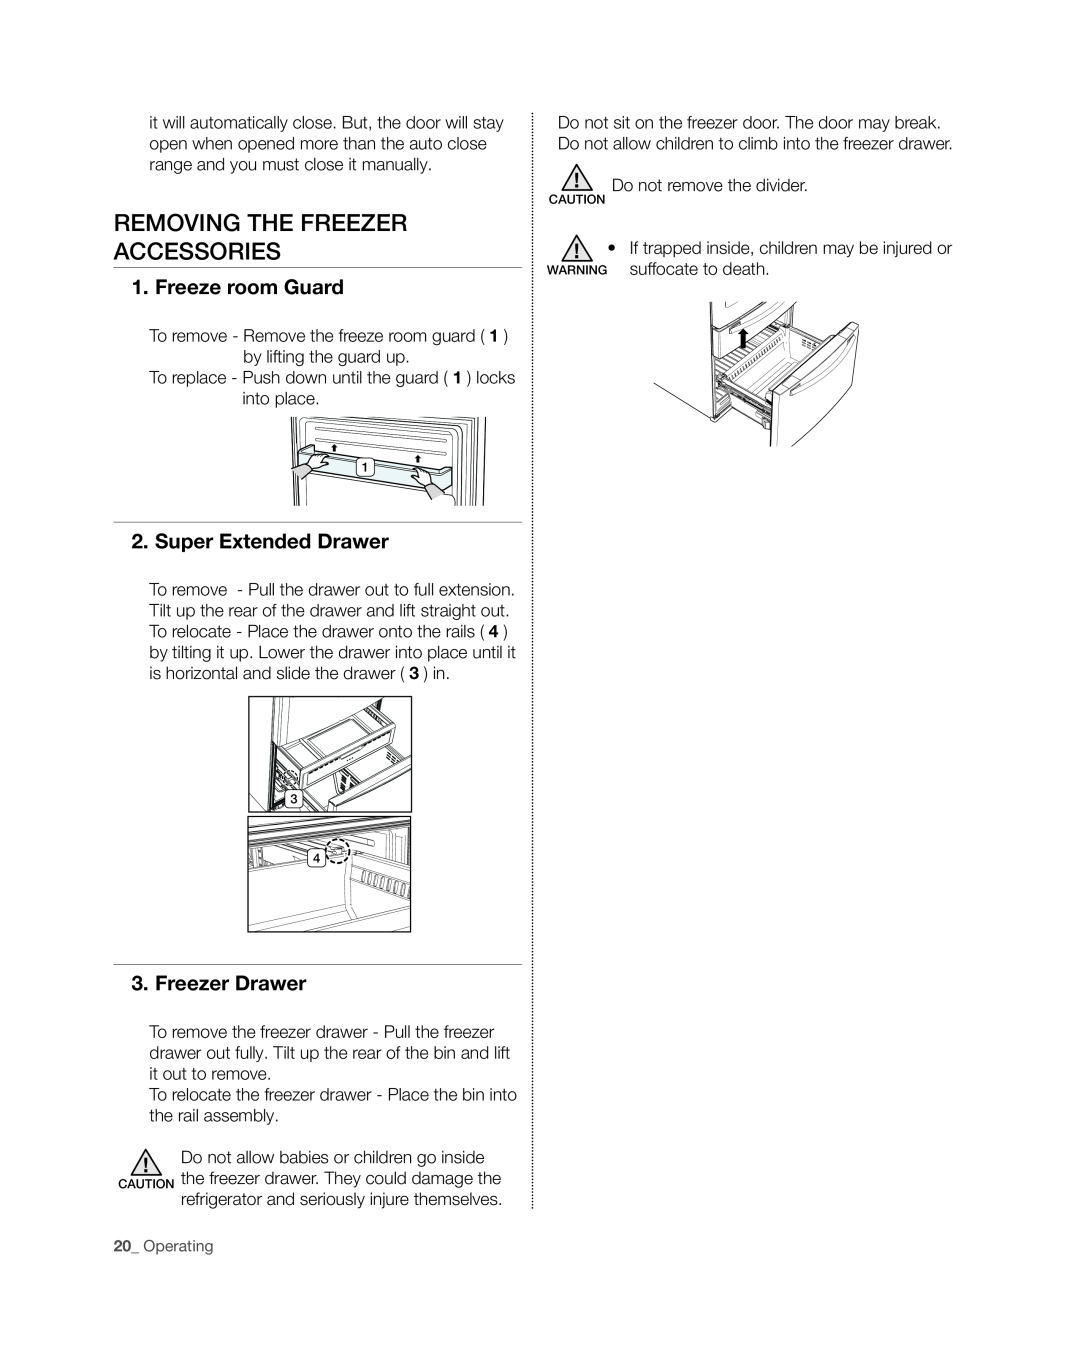 Samsung RF4267HA user manual Removing the freezer accessories, Freeze room Guard, Super Extended Drawer, Freezer Drawer 